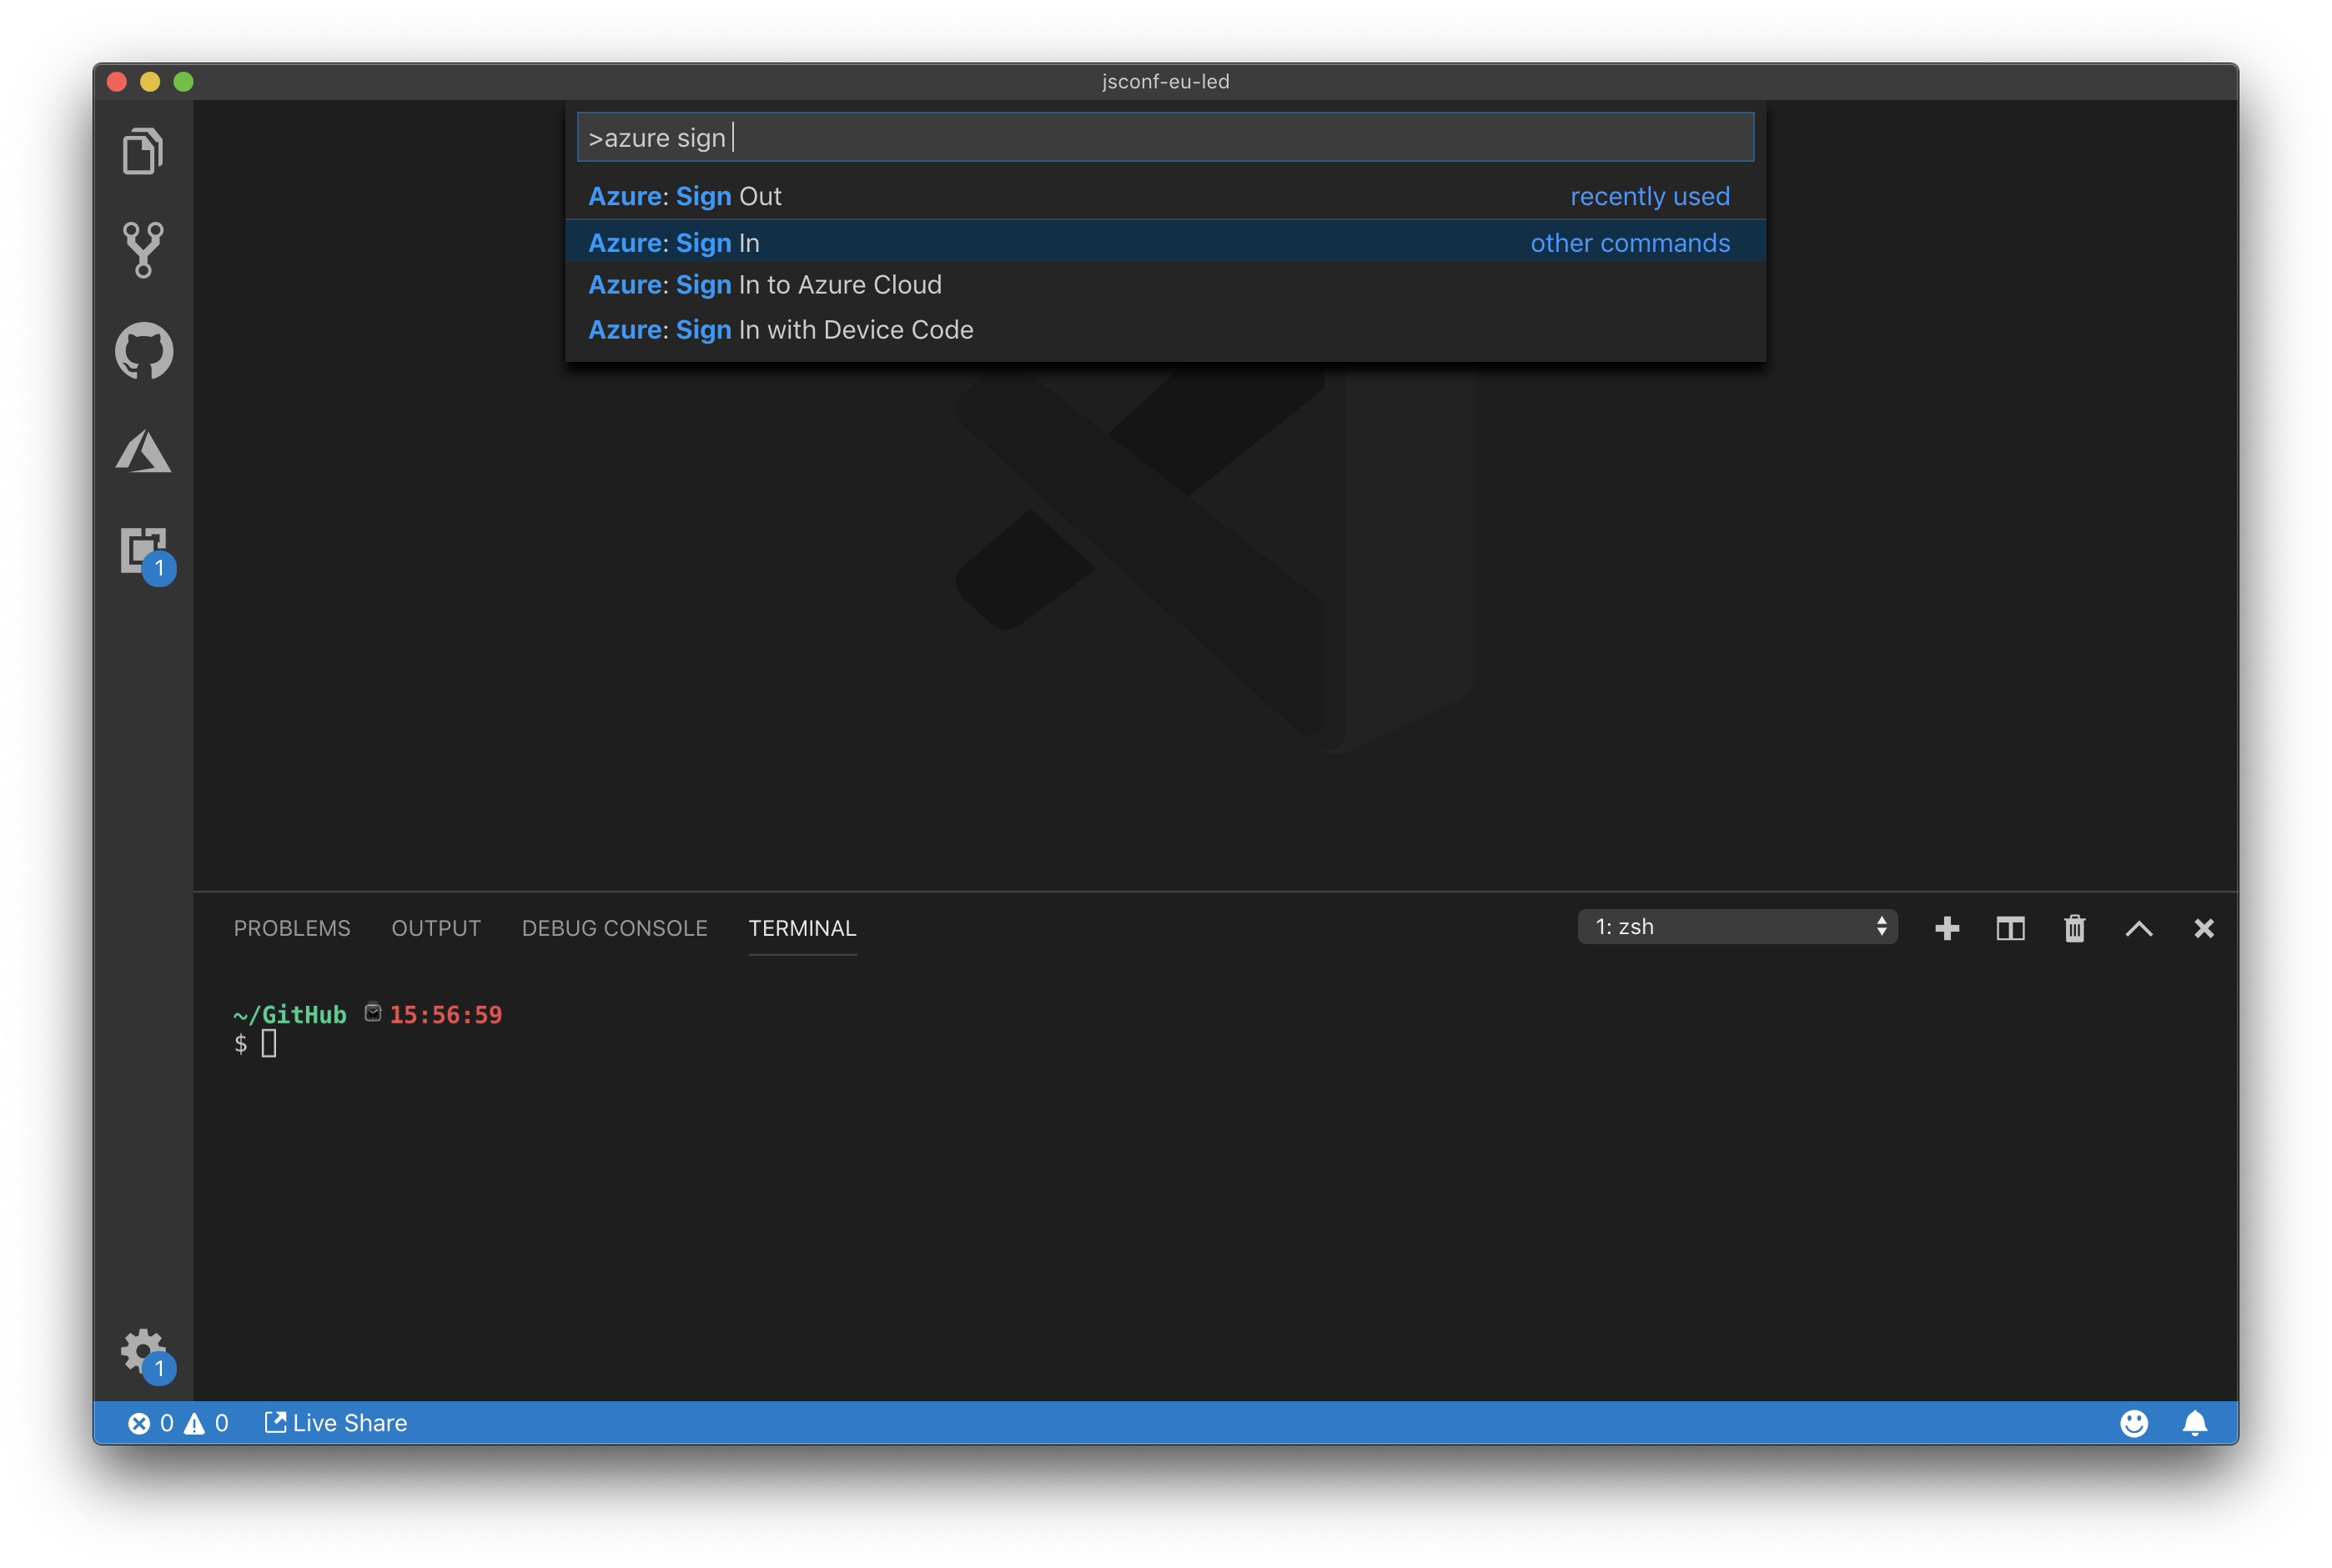 Screenshot of the VS Code Command Palette displaying the Azure: Sign in option